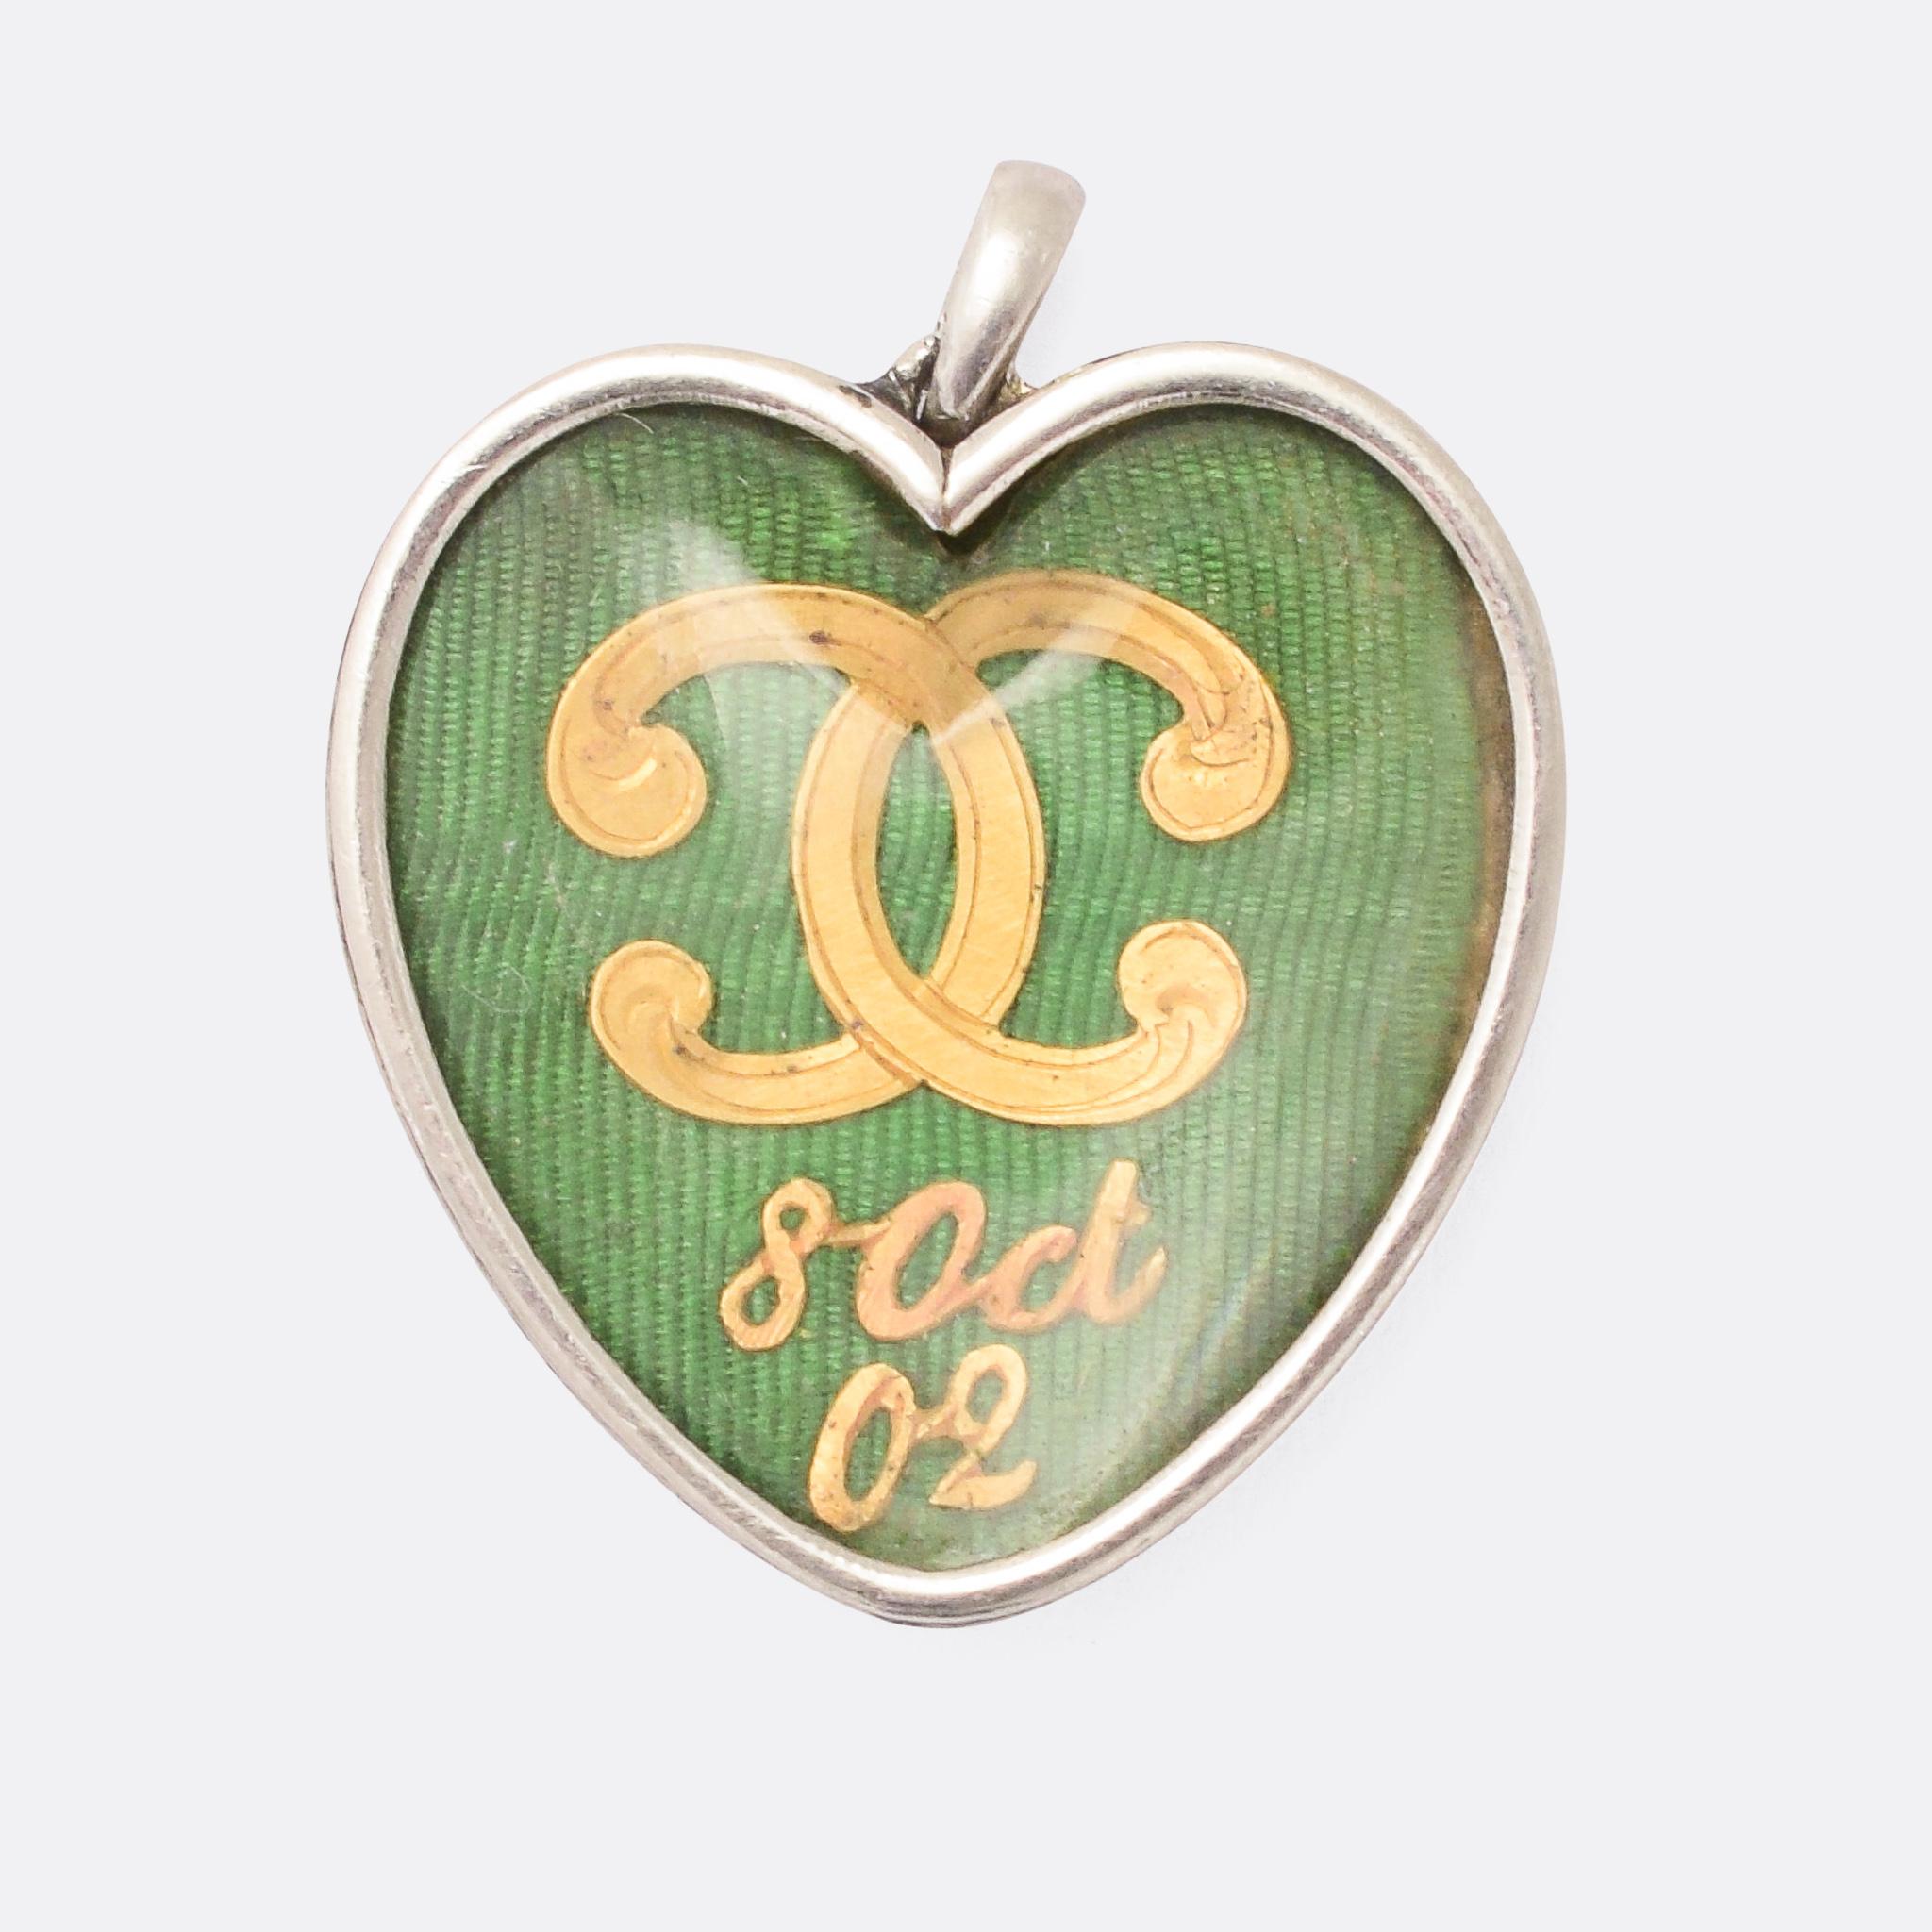 An exceptional antique heart pendant by Cartier Paris. One side features a diamond-set crossed torches motif on a vibrant green guilloché enameled backdrop. Turning it over we find the initials CC - in high carat yellow gold - and a date: October